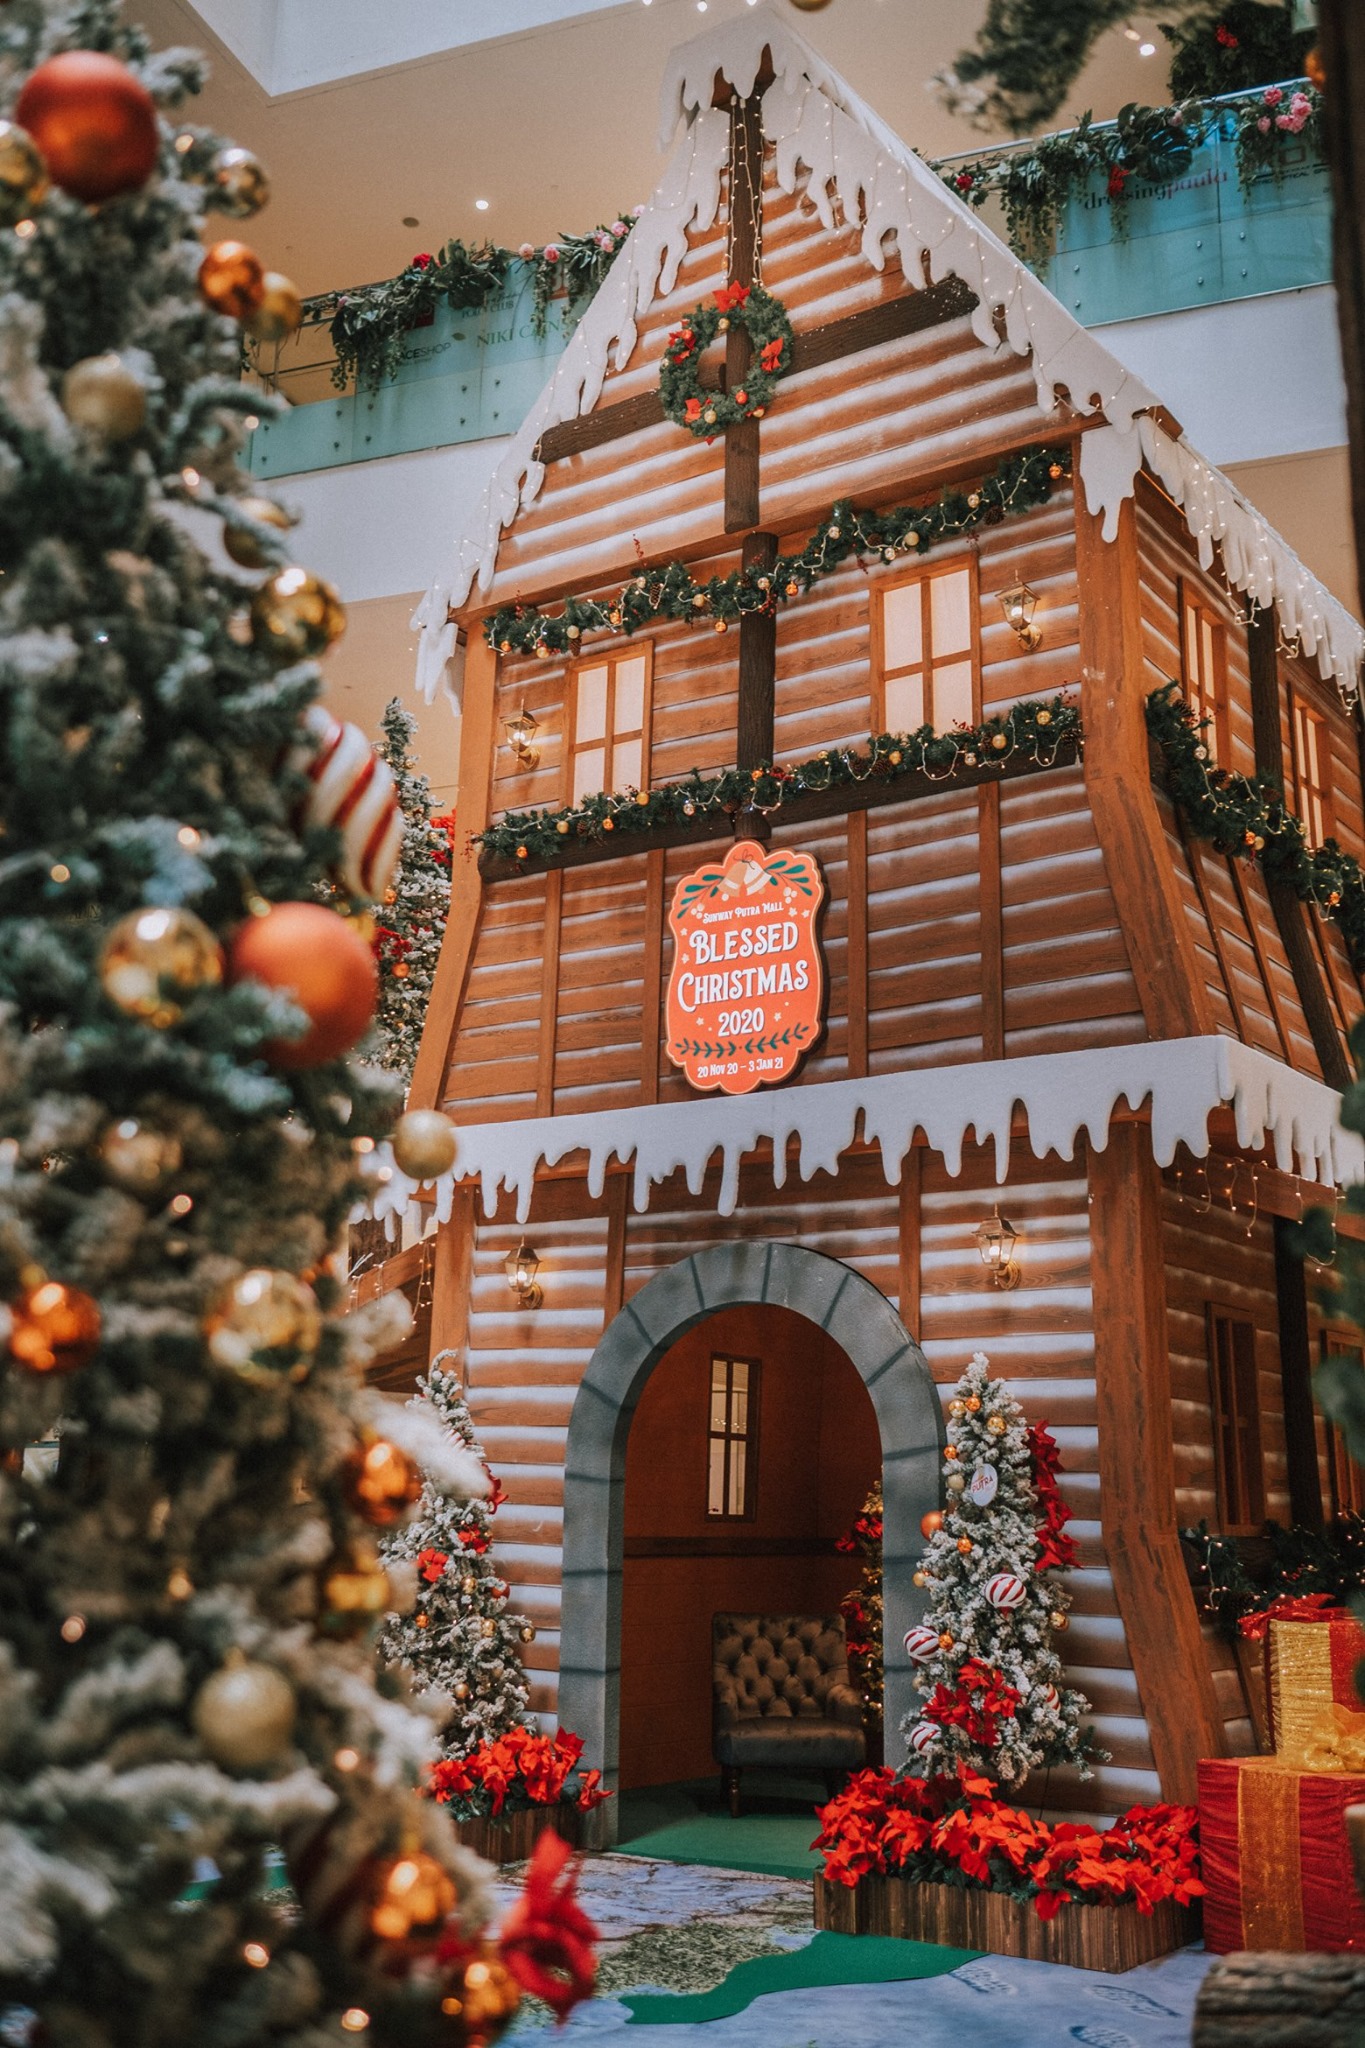 Our Favourite Christmas Shopping Mall Decorations For 2020